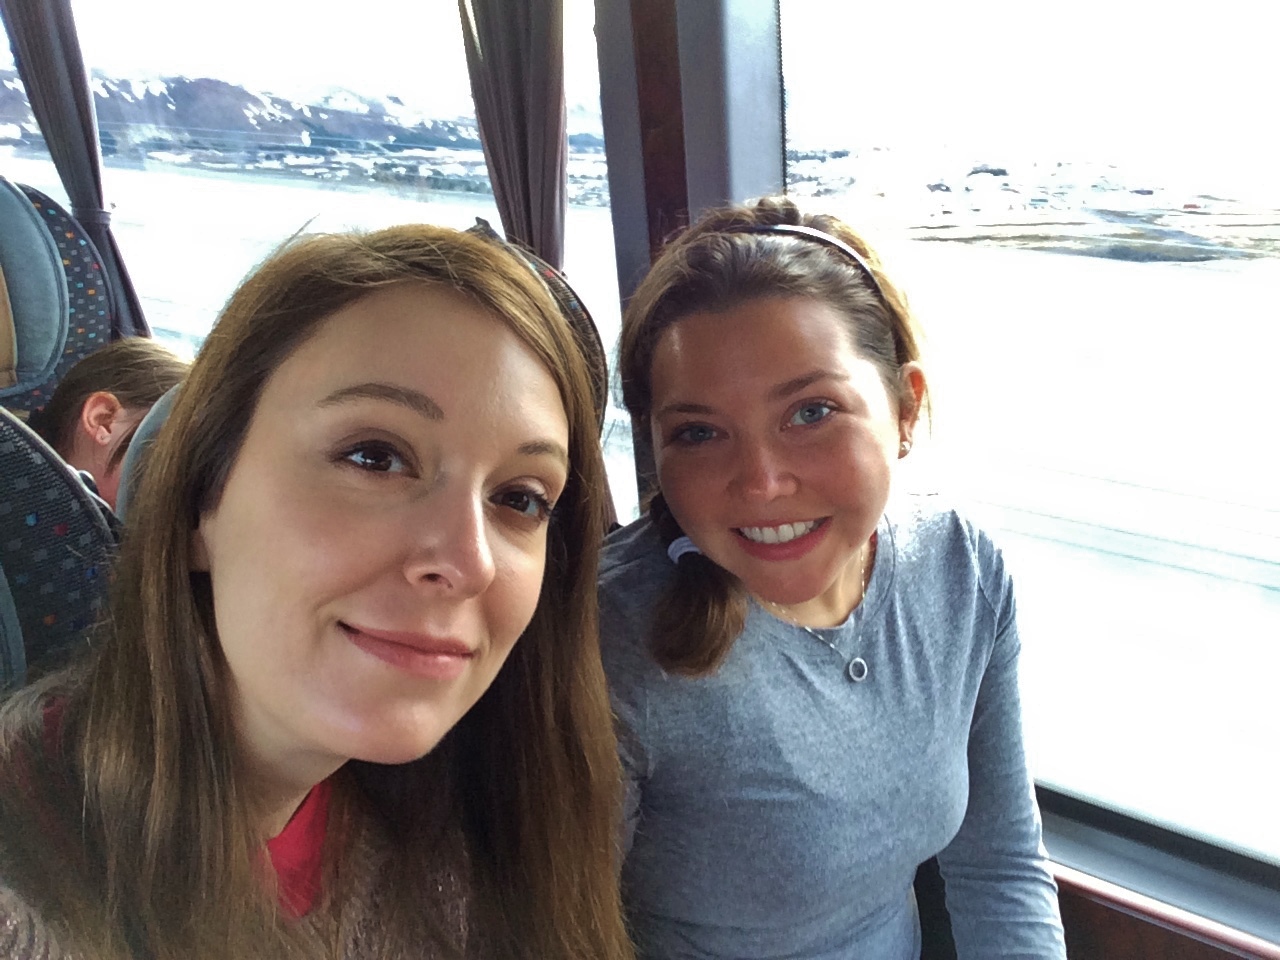 Ashley and Melissa inside the GeoIceland Shuttle Bus during the Golden Circle Tour